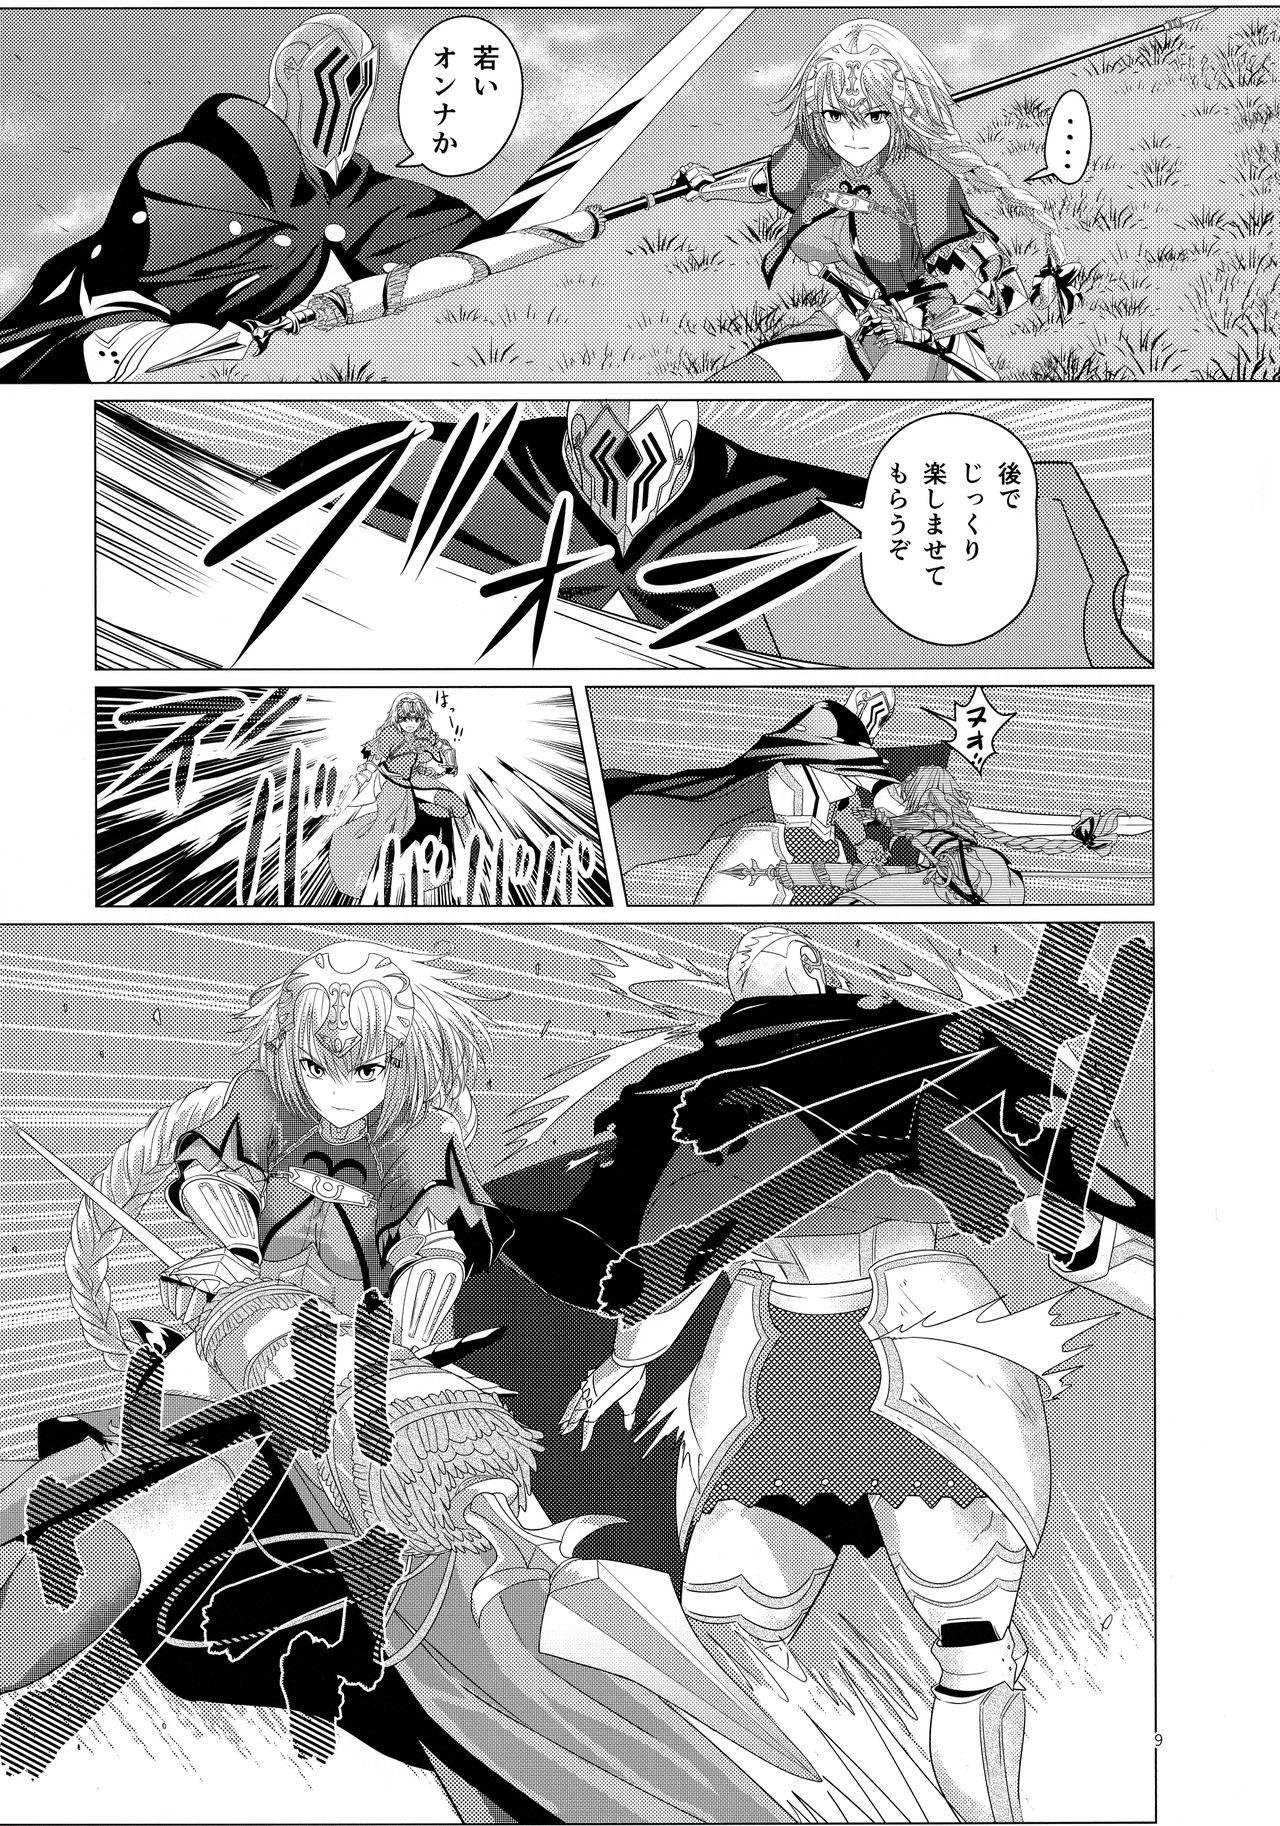 Matching Spirits - Jeanne and Astolfo have sex 7